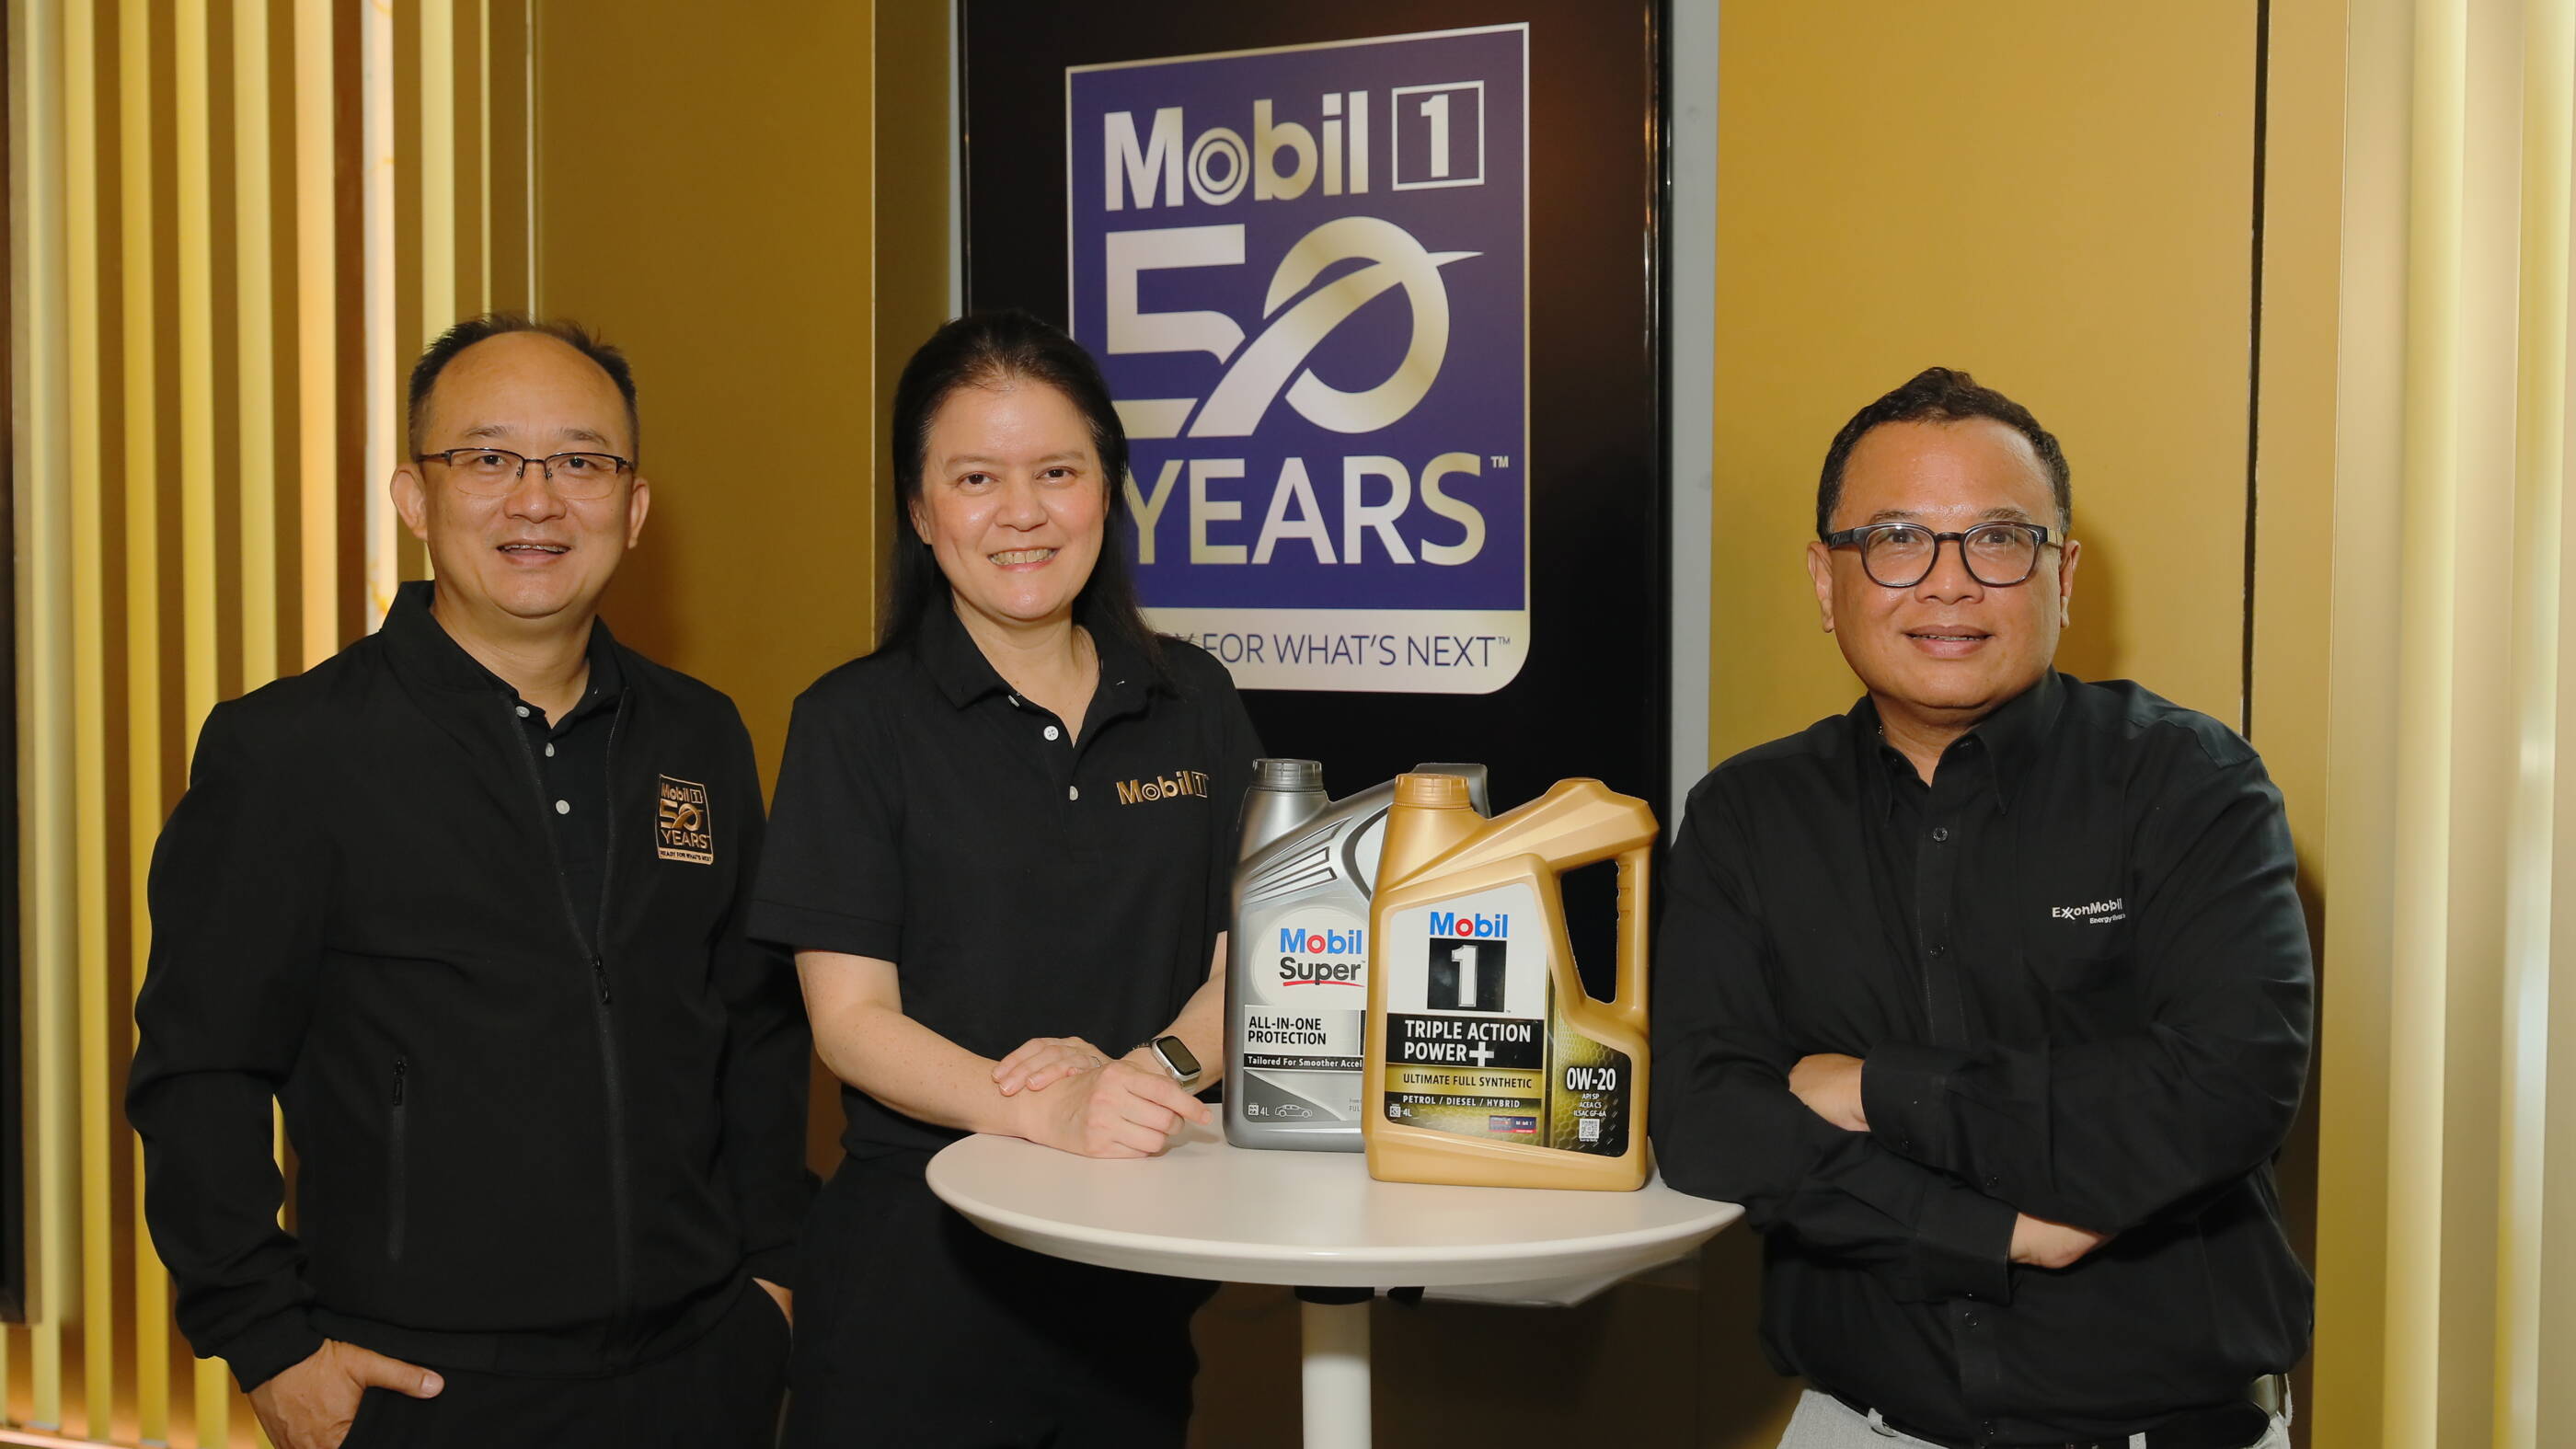 From left to right: Manoch Munjitjuntra, director of ExxonMobil Marketing (Thailand) Limited and lubricant sales manager,Suda Ninvoraskul, managing director, Dr. Taweesak Bunluesin, public and government affairs manager, ExxonMobil Limited.